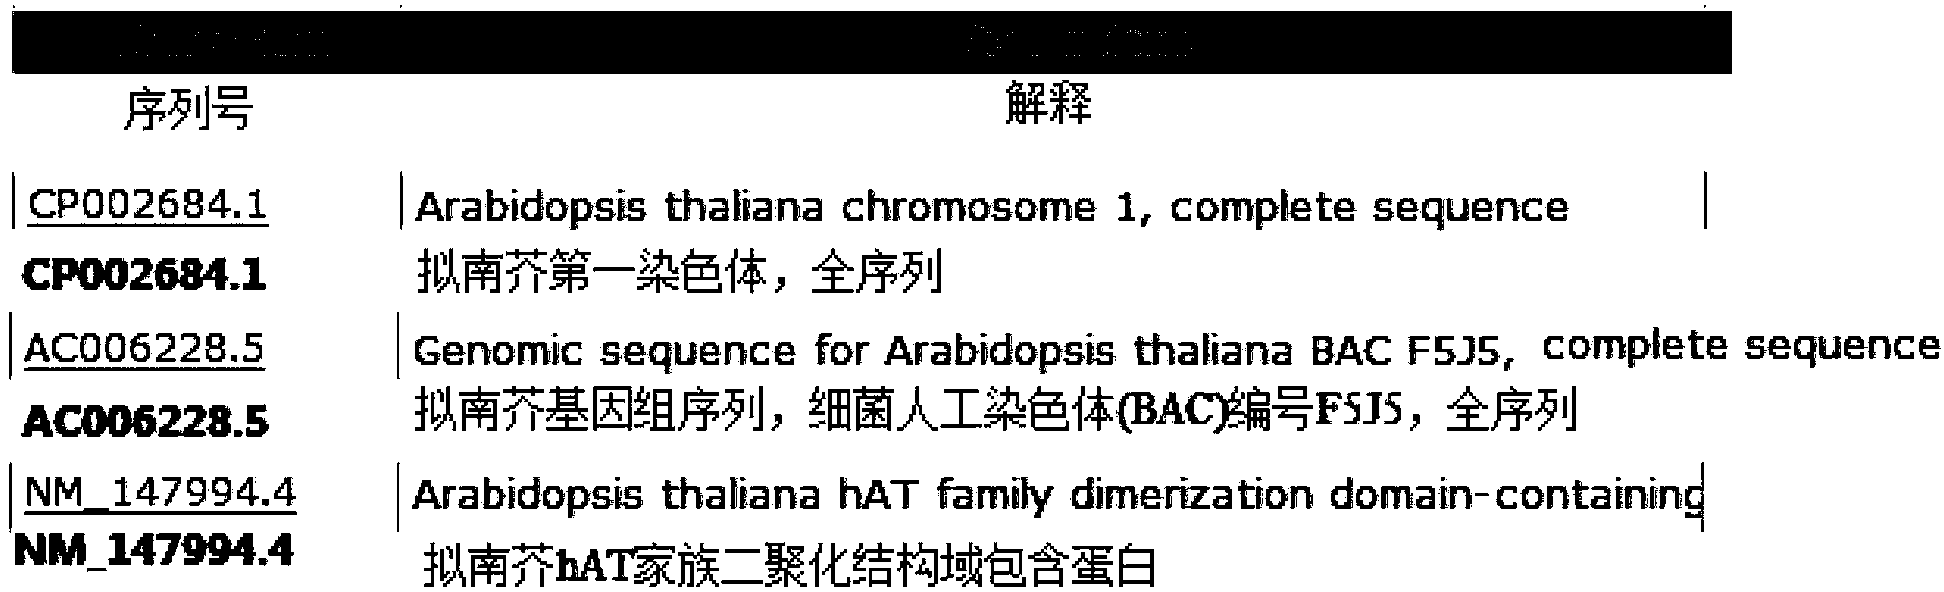 Chinese cabbage eIF (iso) 4E.c site transposon degenerated hull